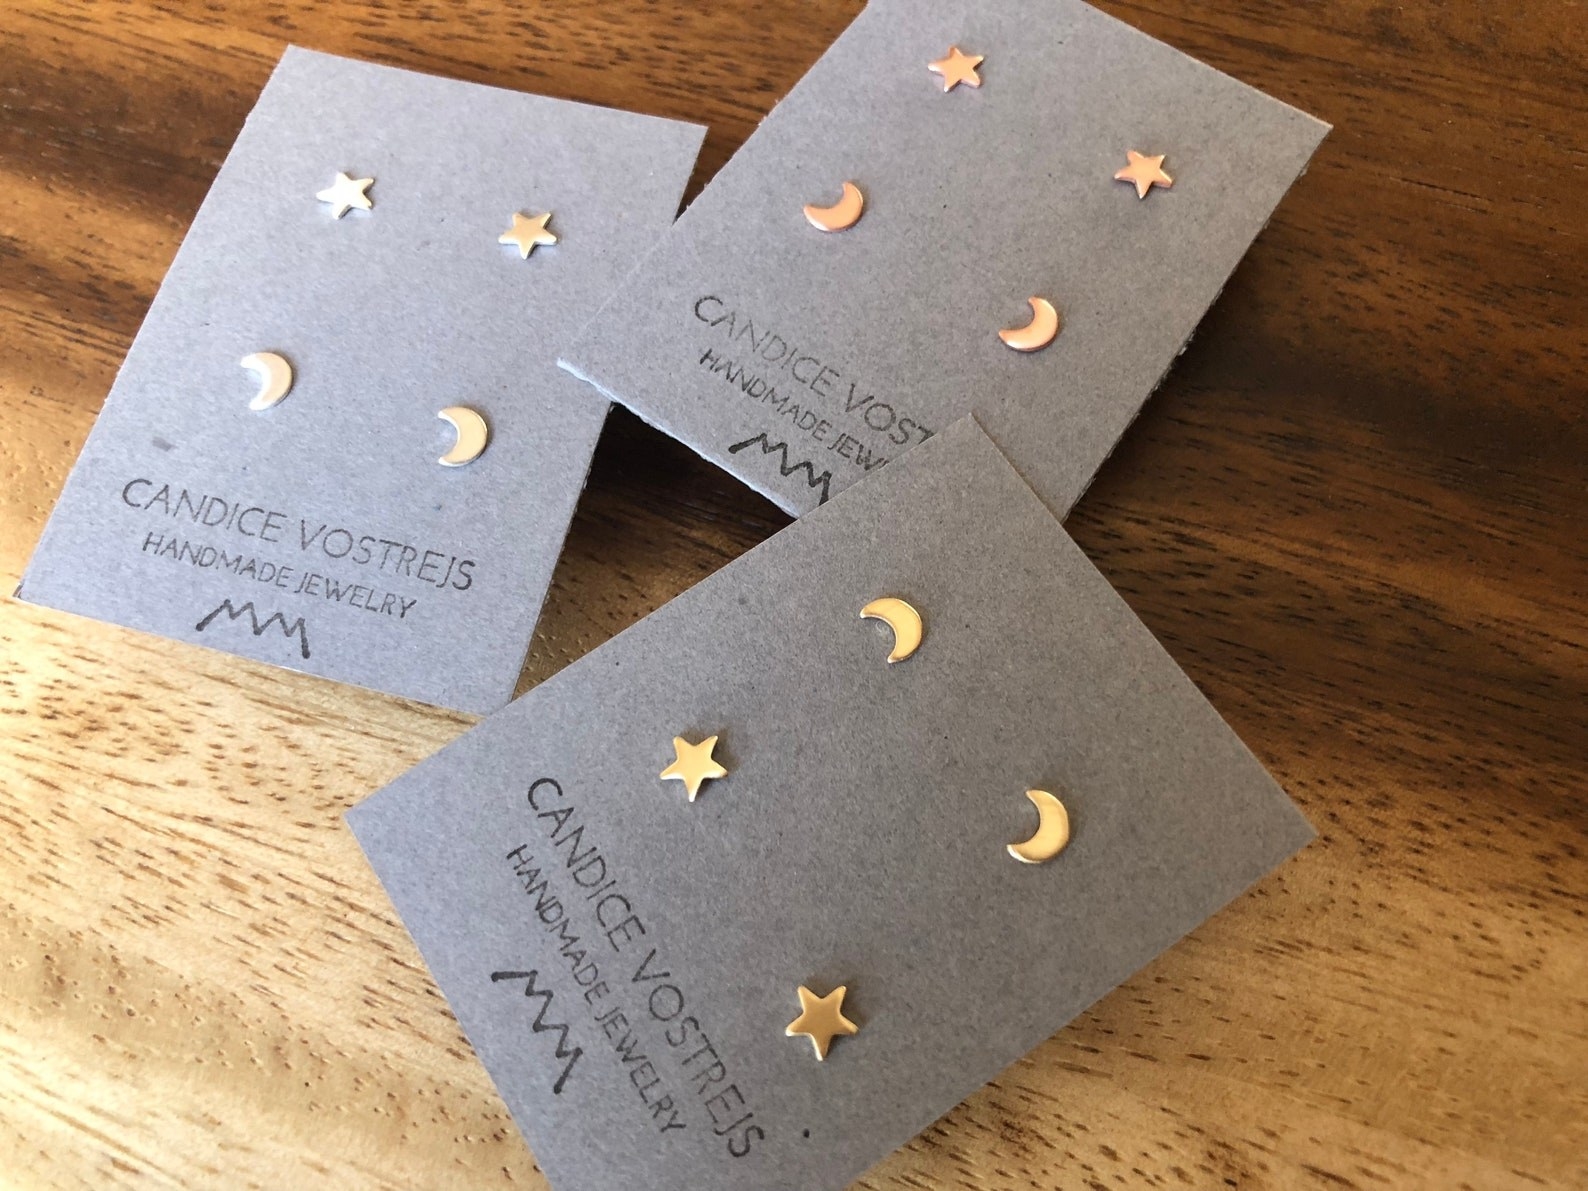 stud earrings in the shape of stars and crescent moons